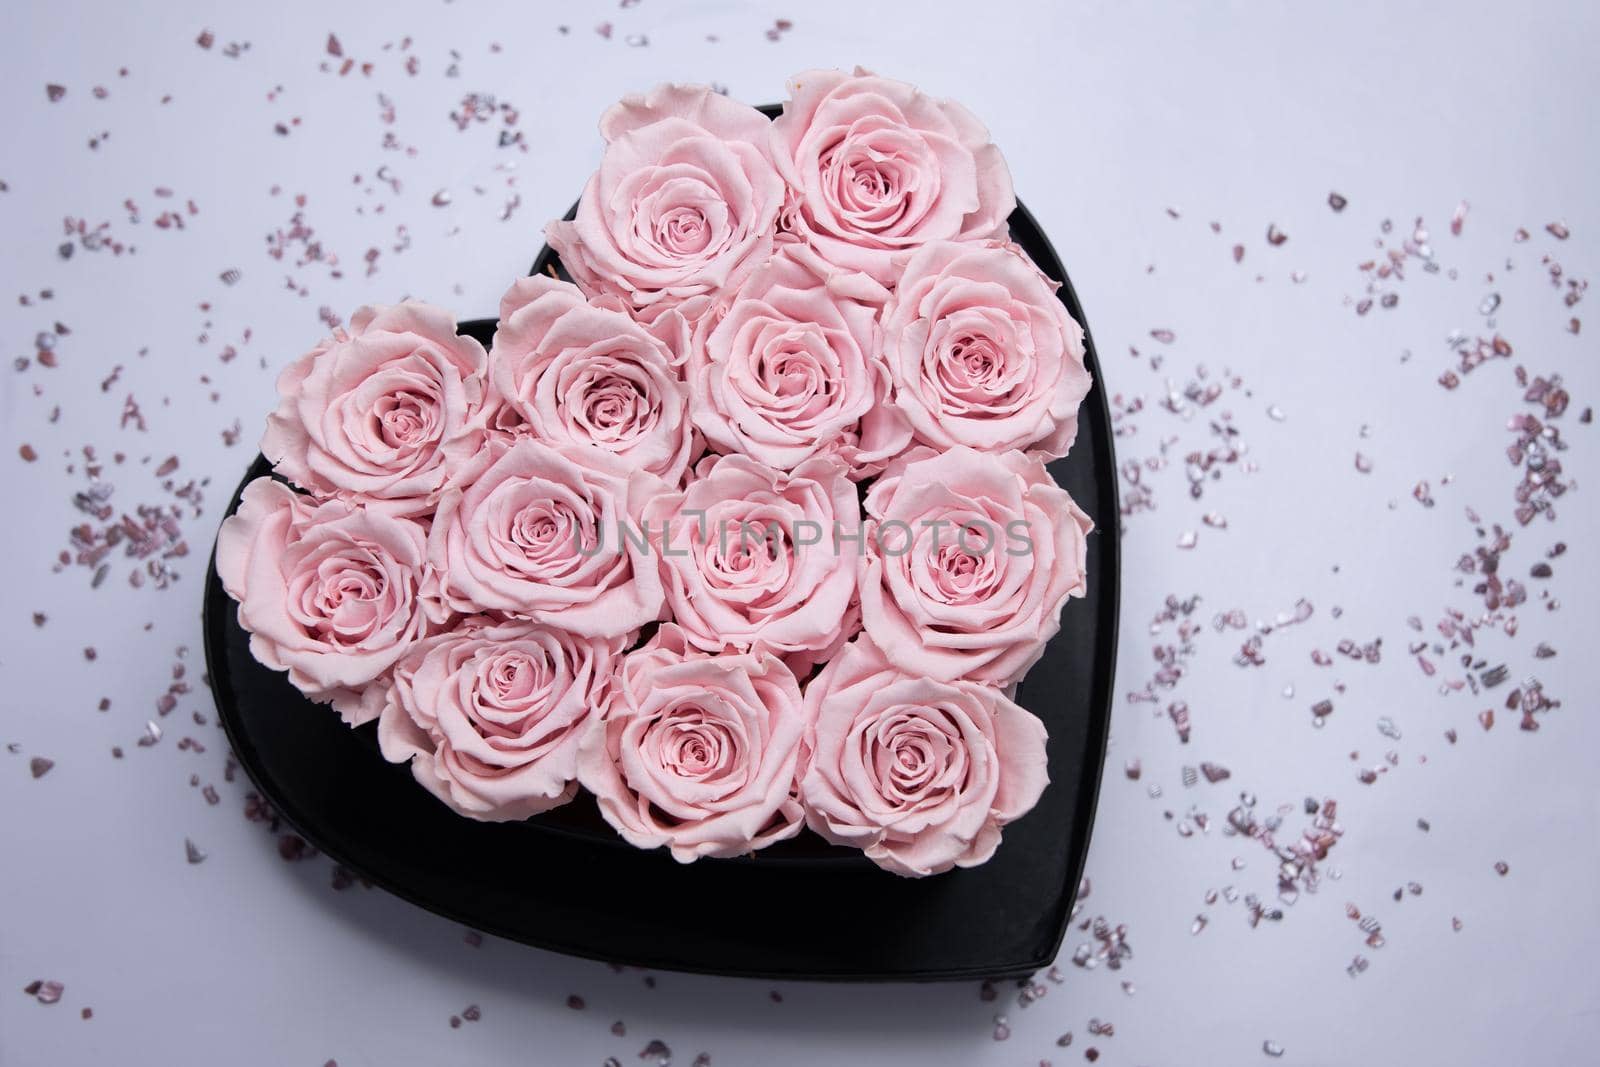 heart-shaped cardboard box with pink roses on the table, a gift for valentine's by KaterinaDalemans